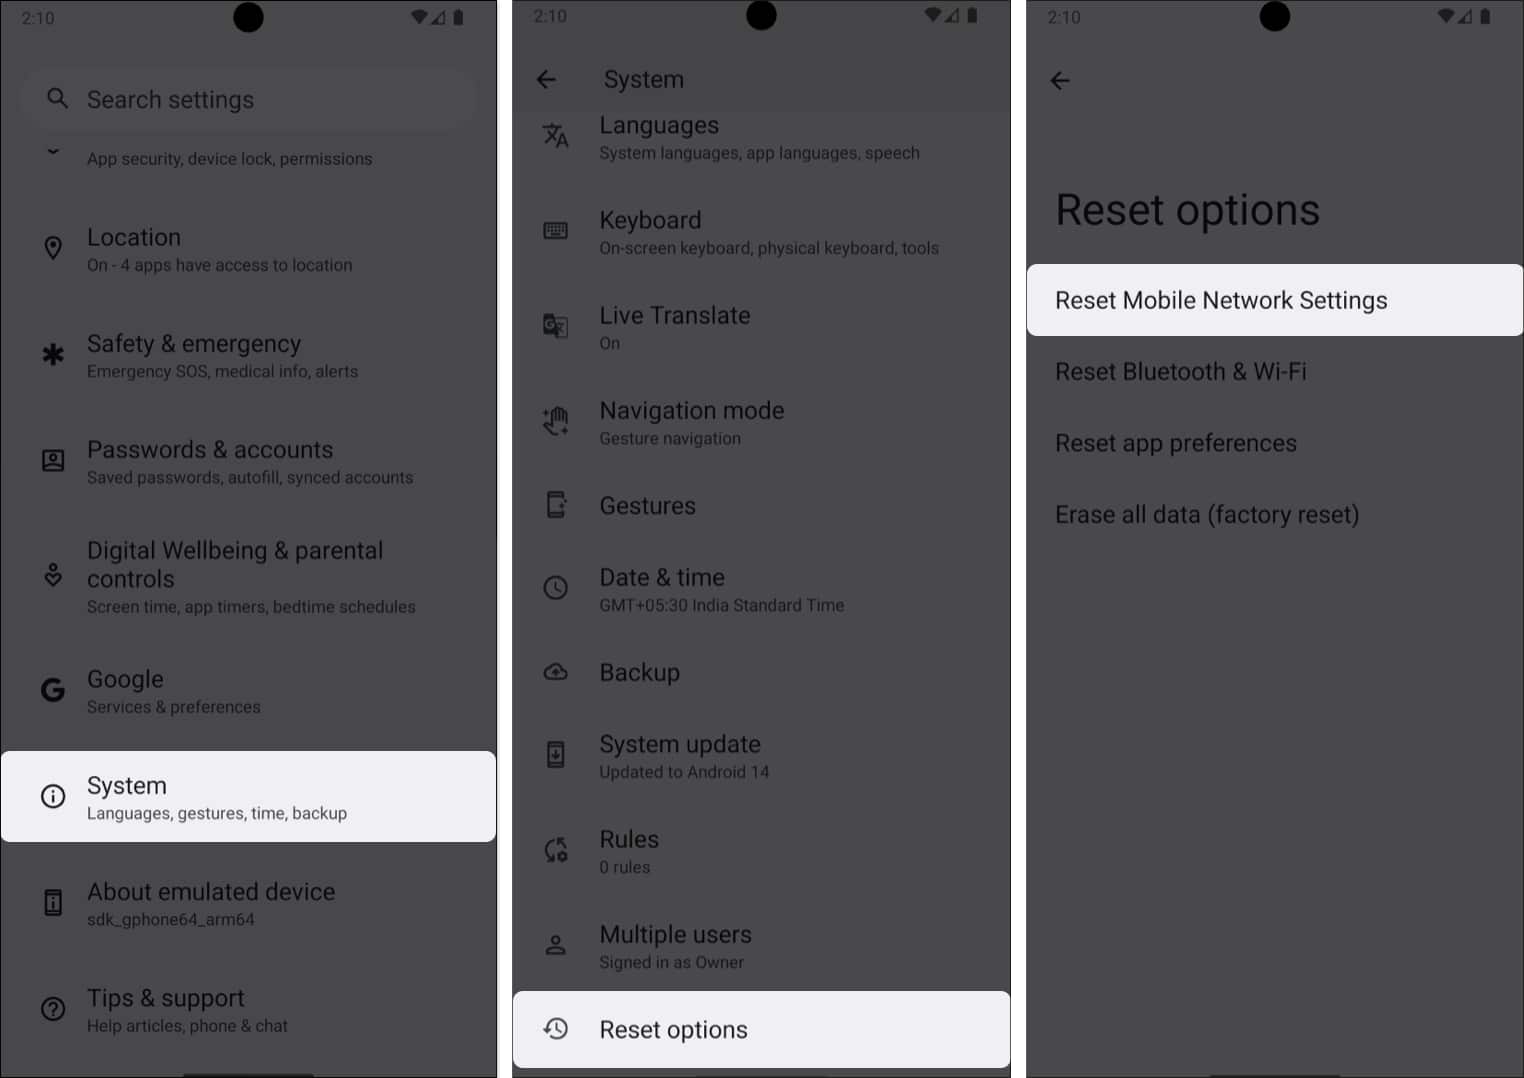 Open Settings, go to System, select Reset options and tap Reset Mobile Network Setting on your Android phone